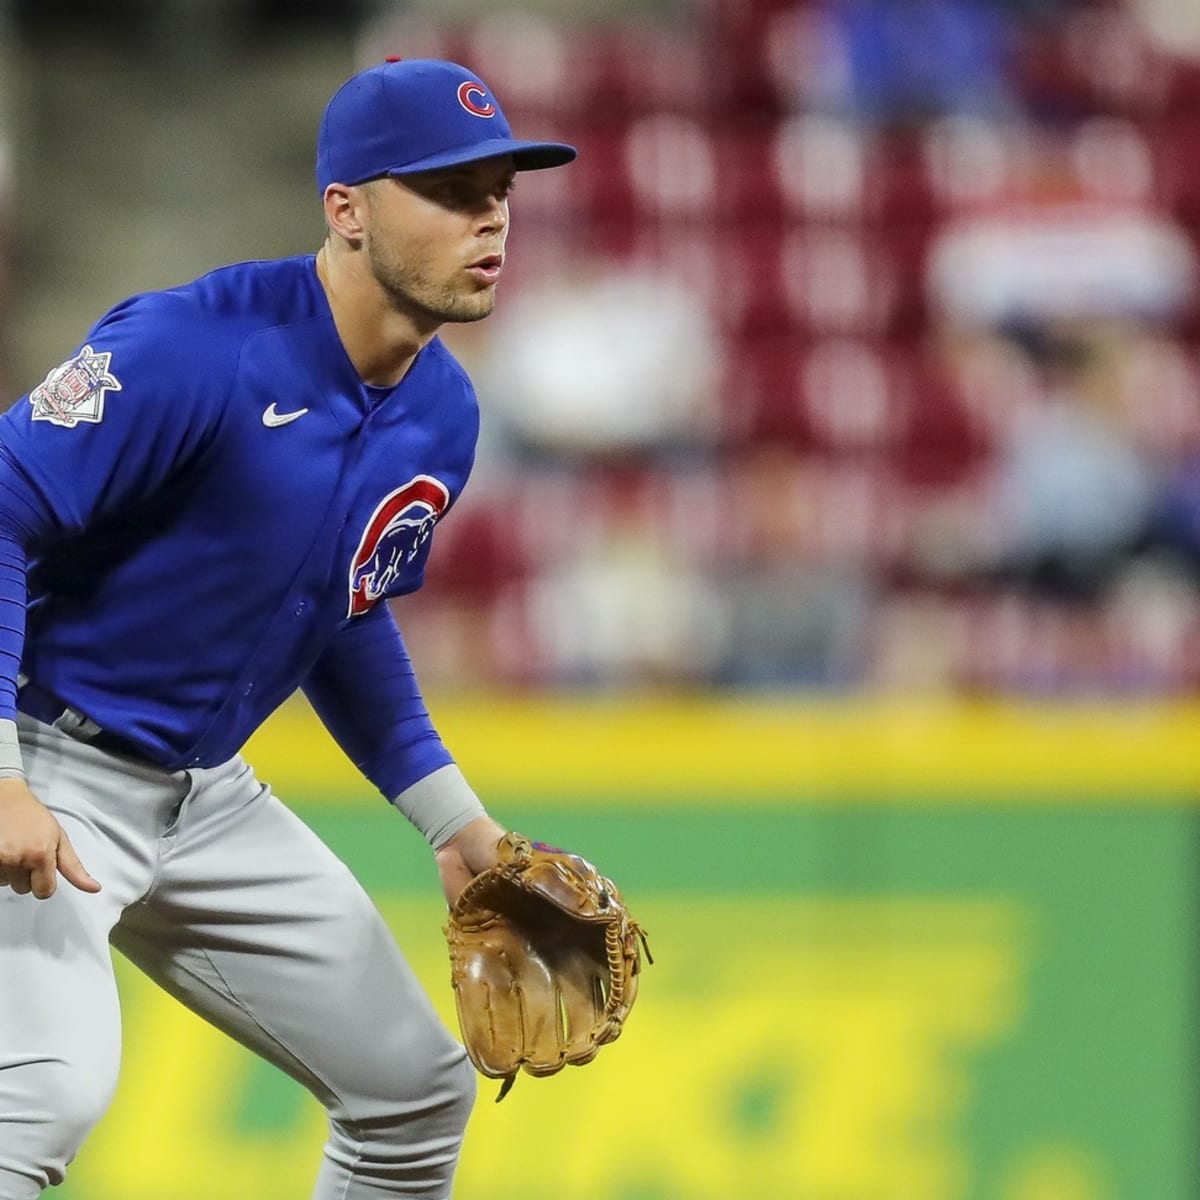 With only Dansby Swanson left, should Cubs fans brace for a shortstop-less  free agent haul?